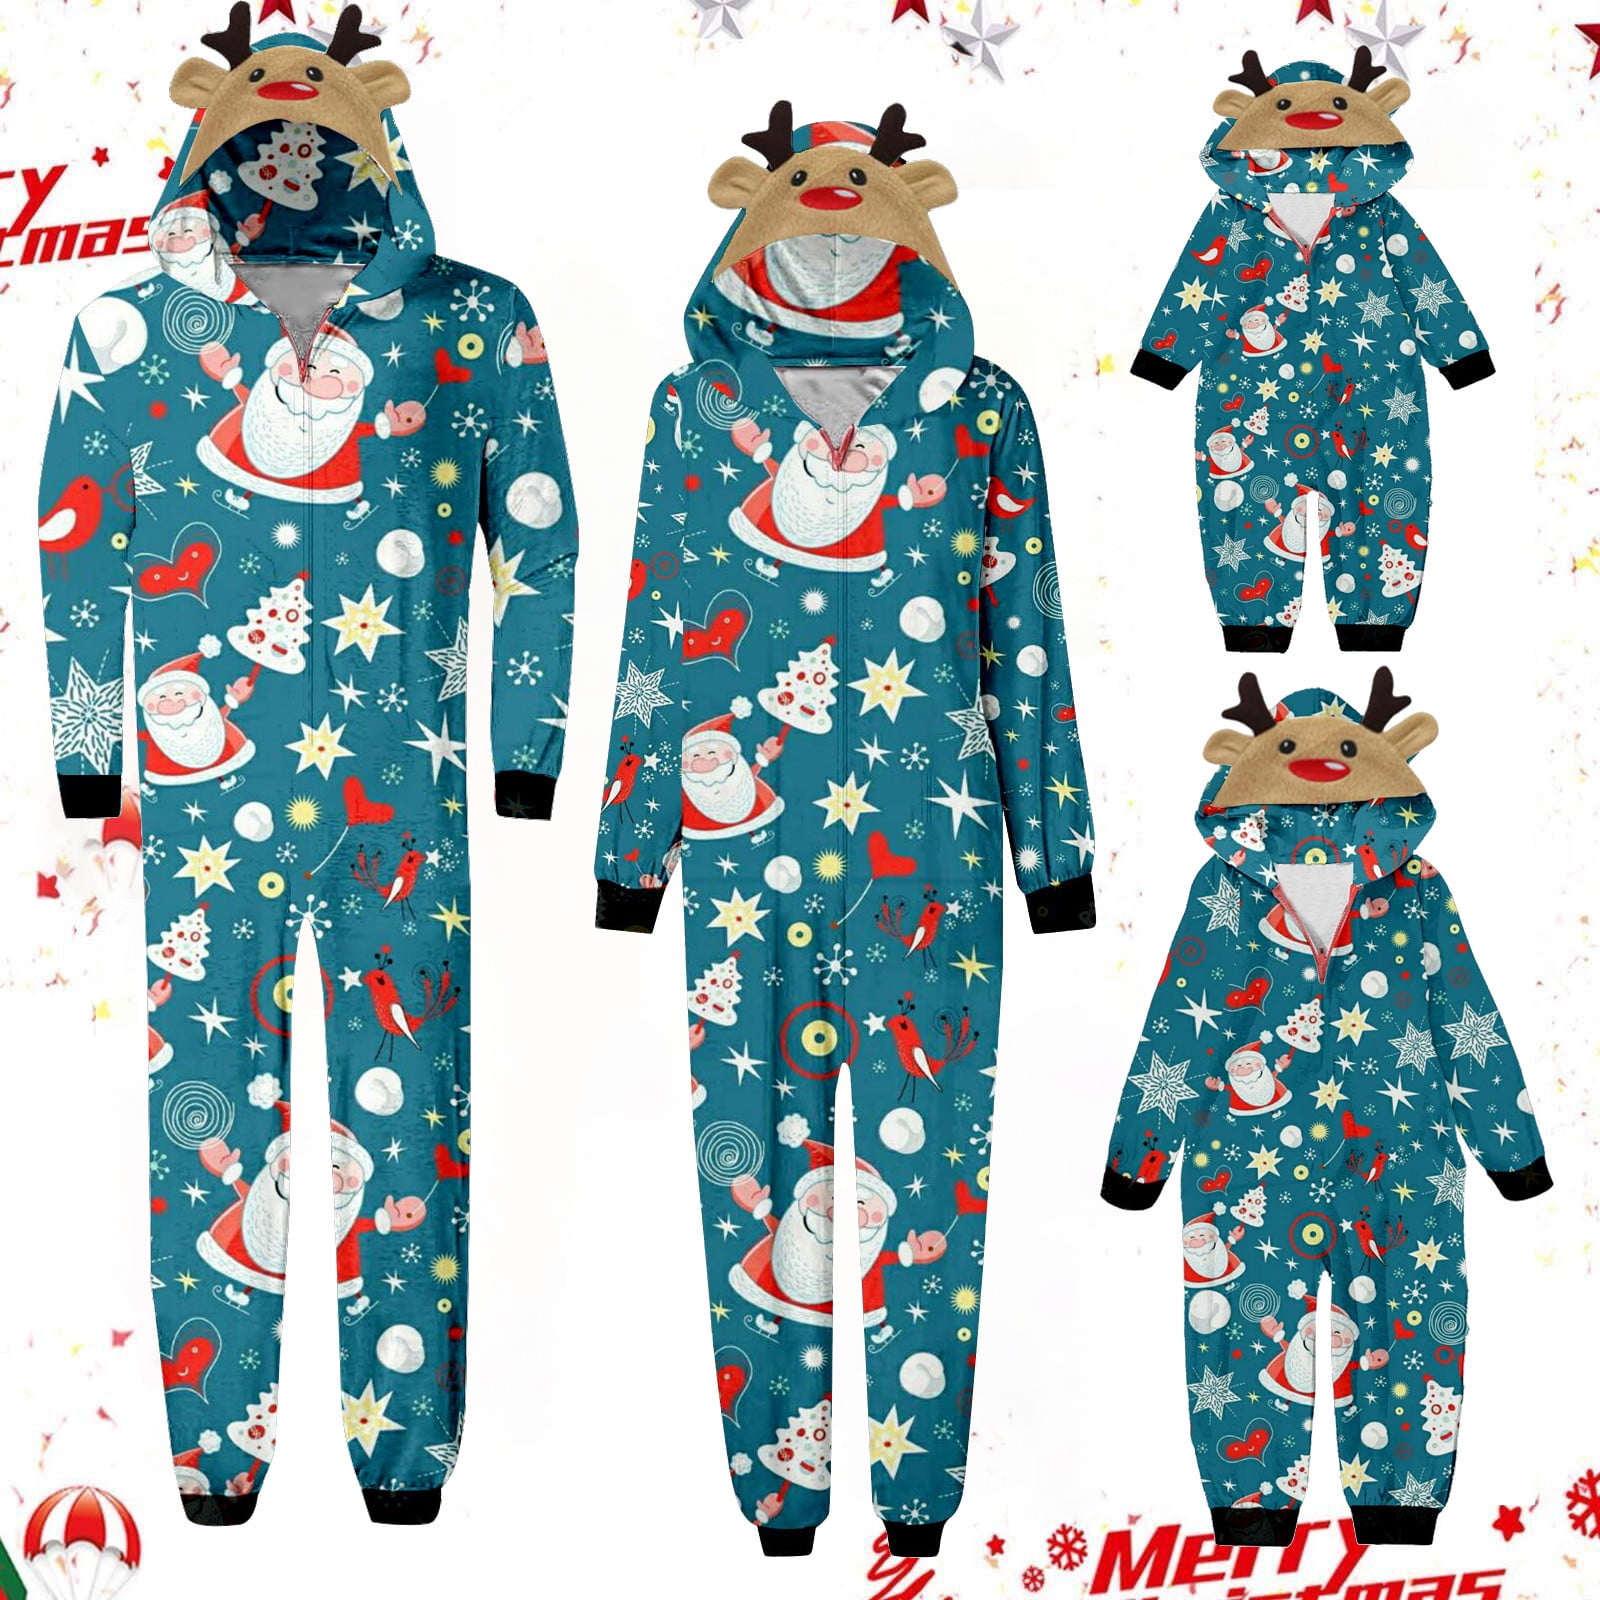 Meichang Matching Christmas Onesies Pajamas for Family Vacation Cute ...